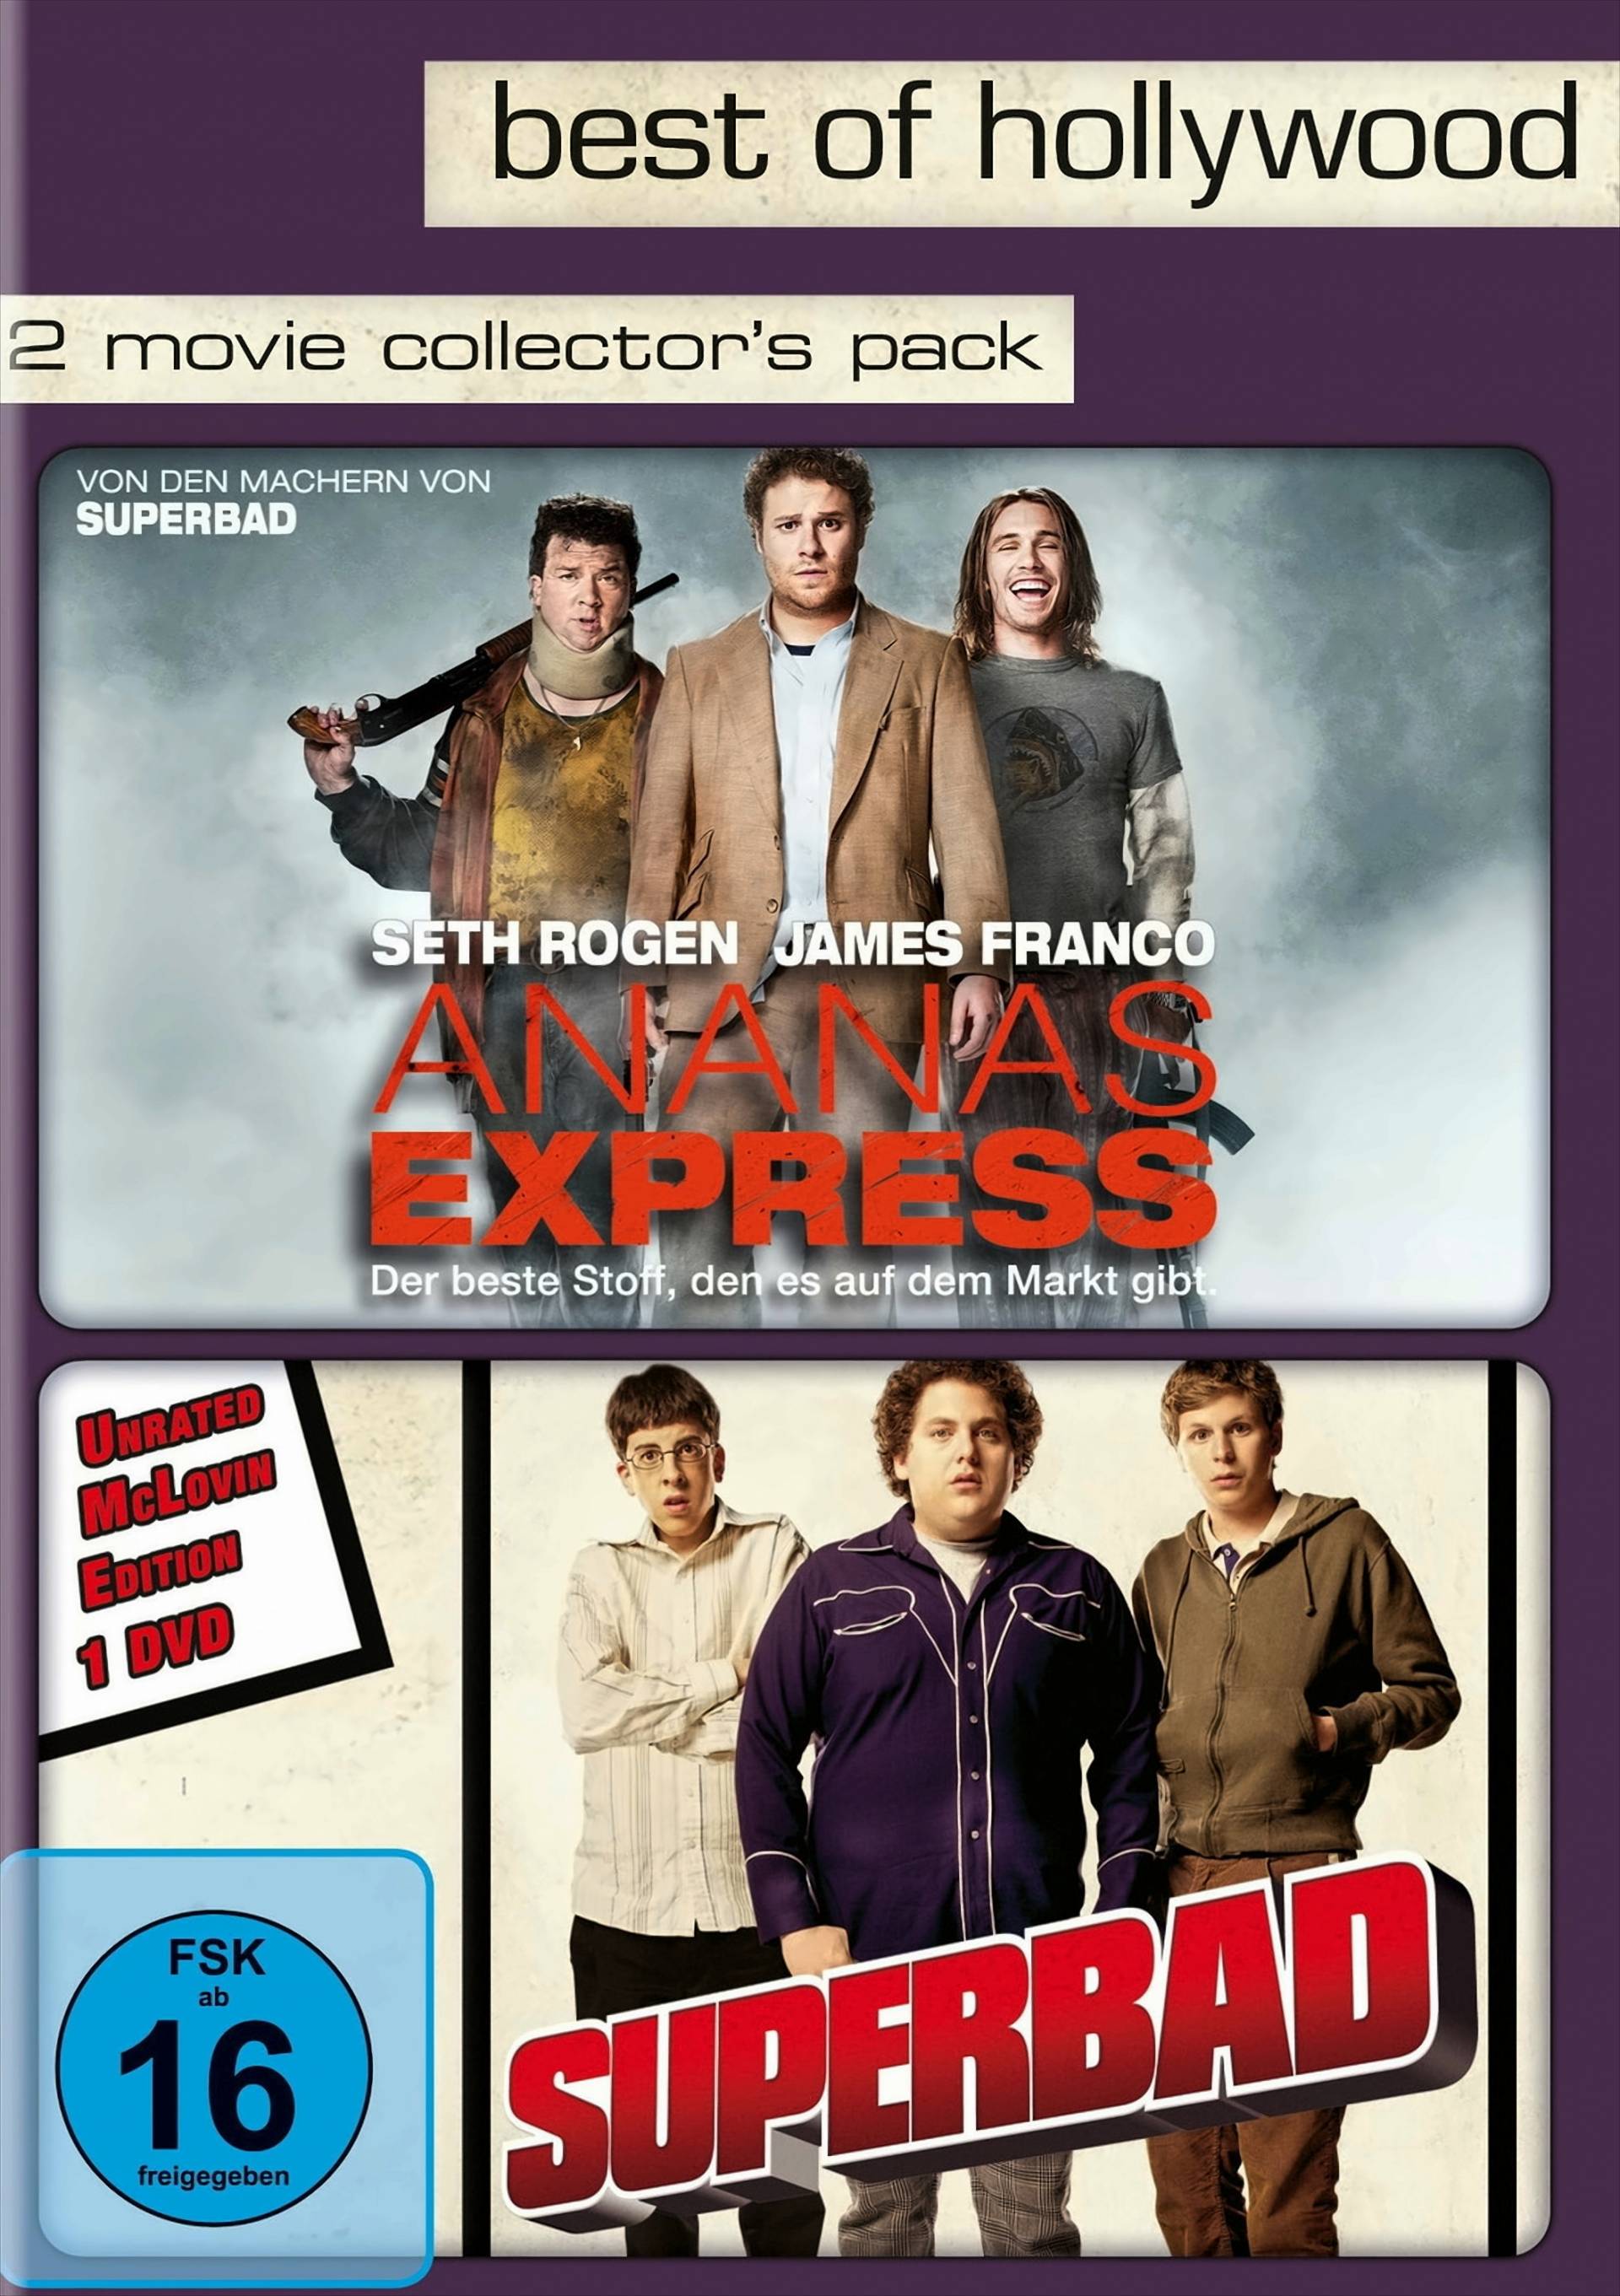 Best of Hollywood - 2 Movie Collector's Pack: Ananas Express / Superbad von Sony Pictures